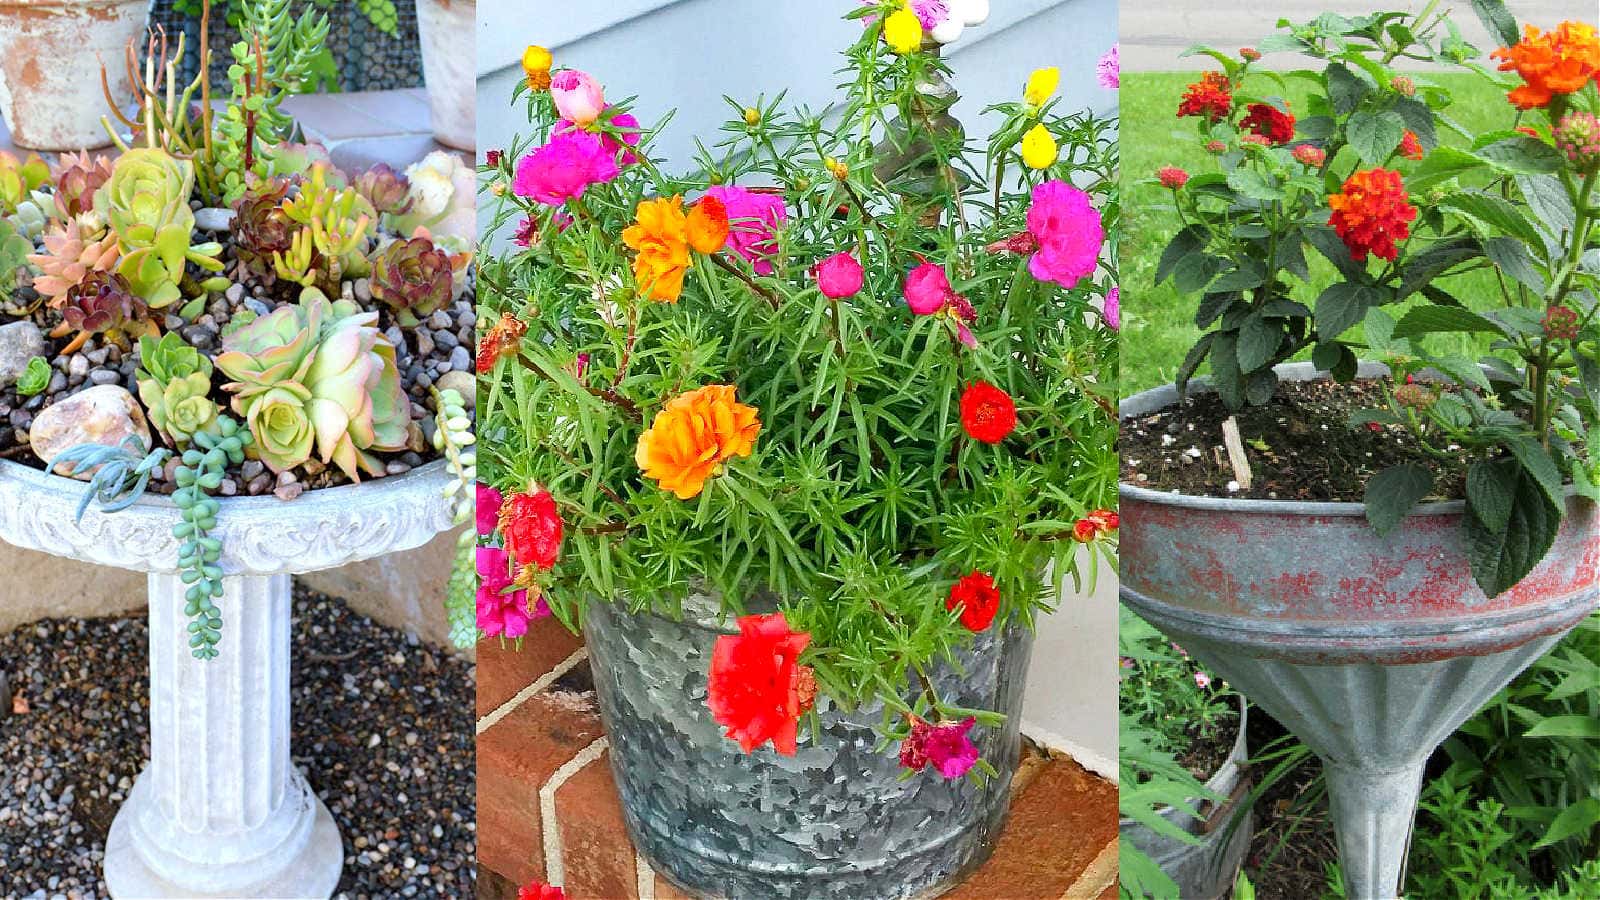 Fun and Junky Planters for Your Yard